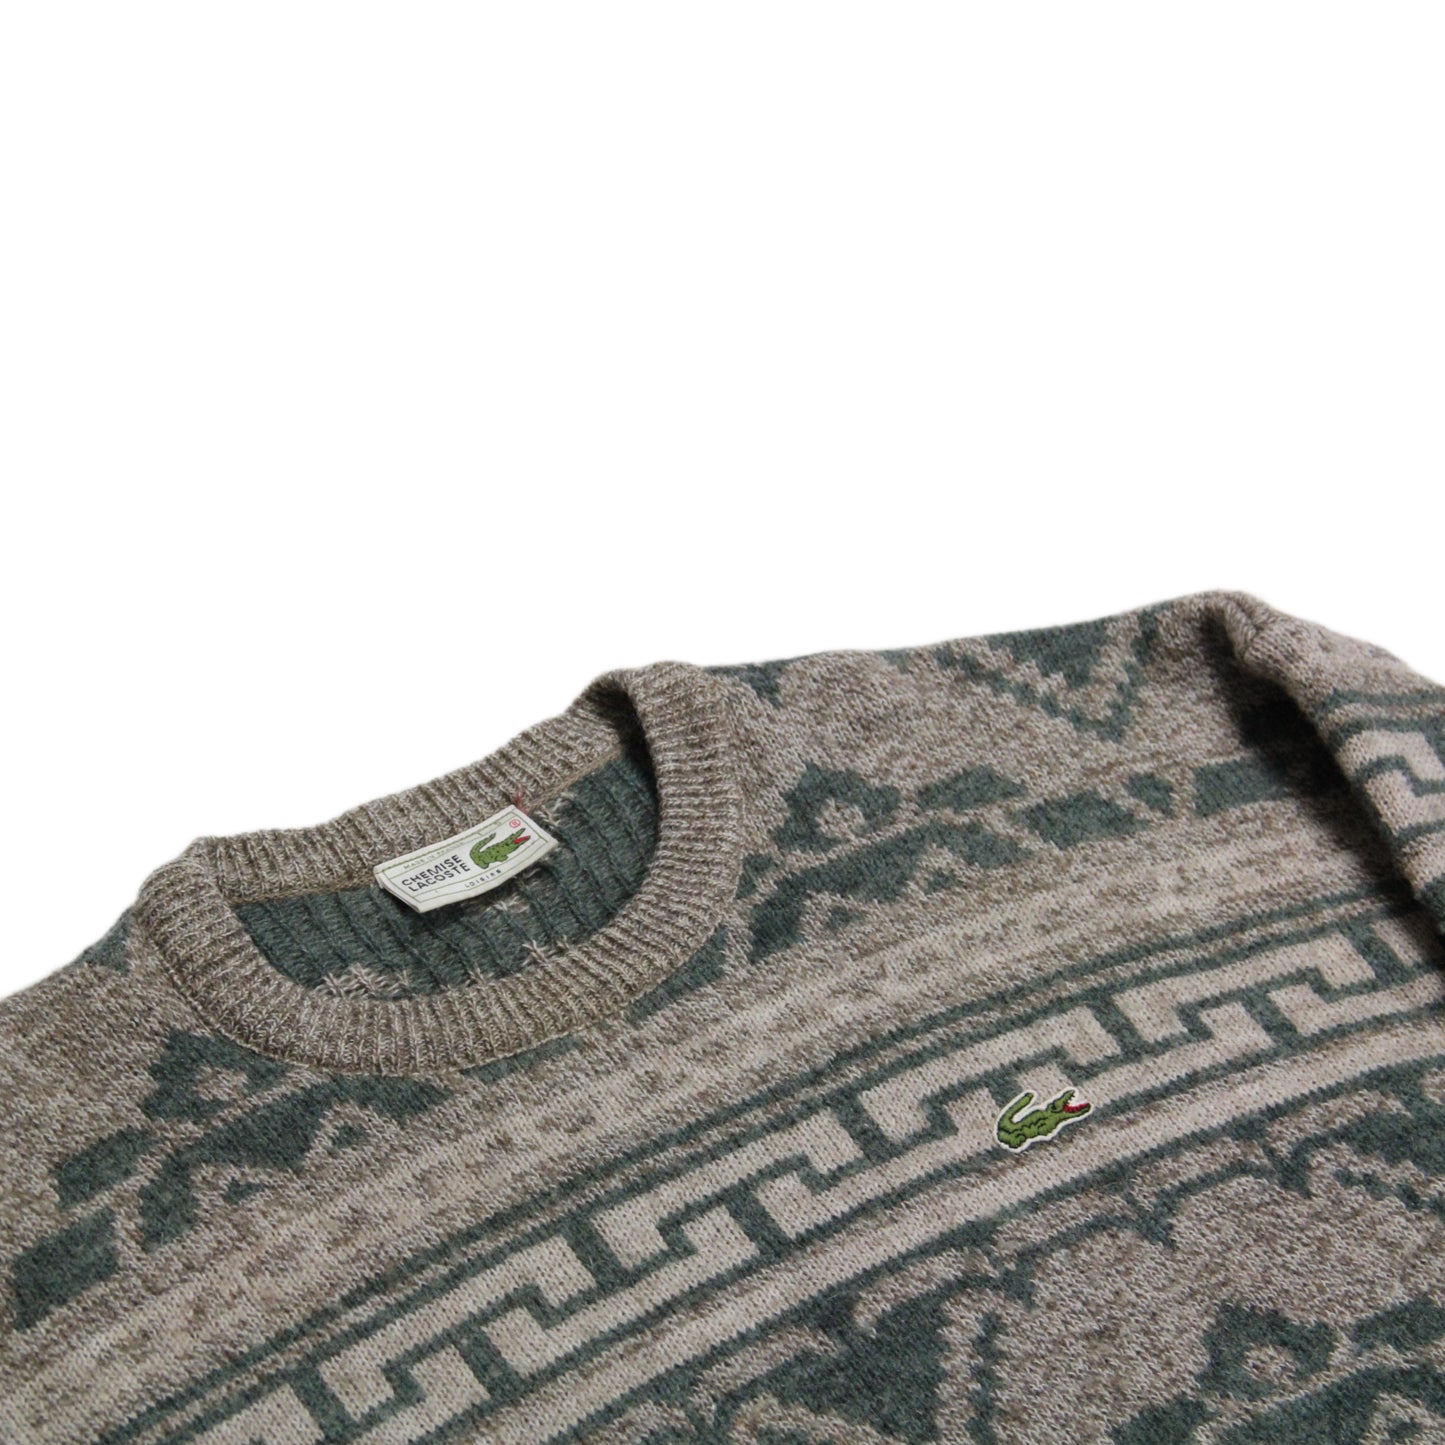 Lacoste Vintage Wool Sweater by "Chemise Lacoste"